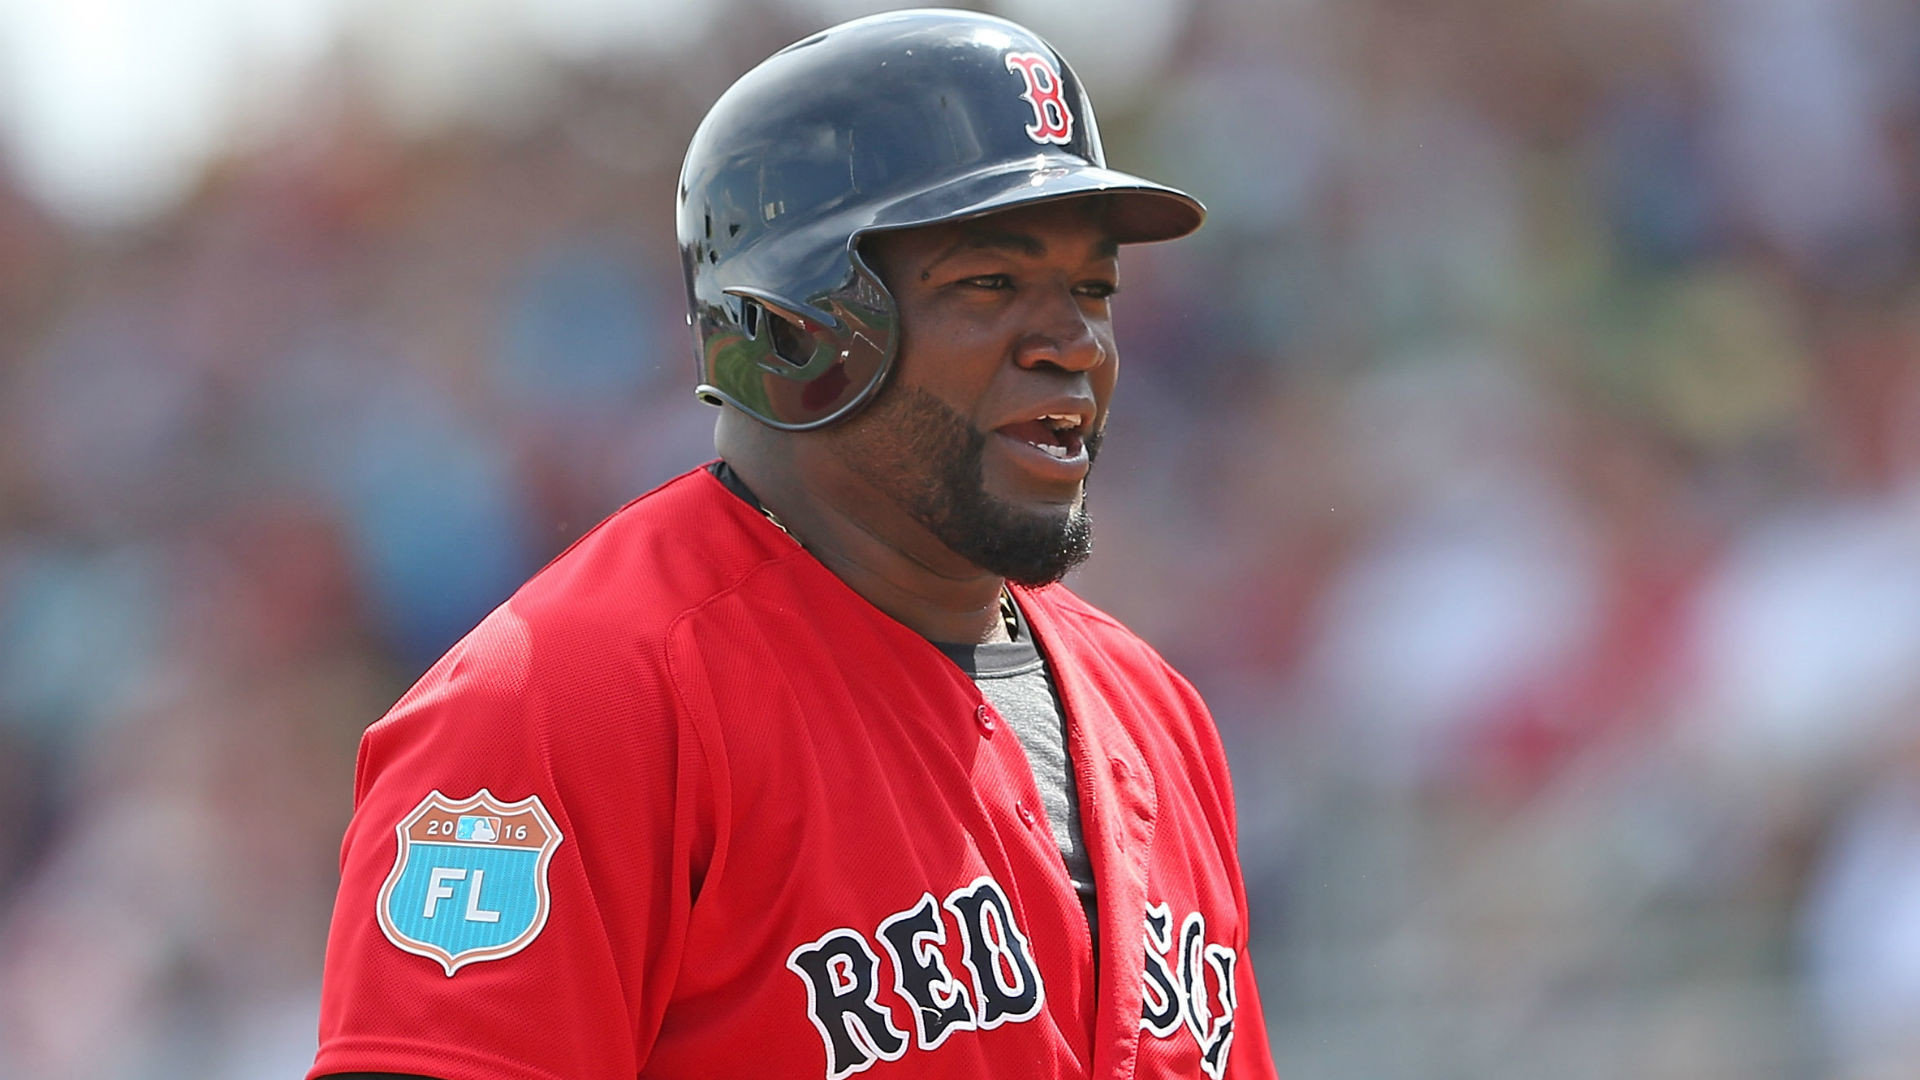 1920x1080 David Ortiz returning to Red Sox in front-office role | MLB | Sporting News